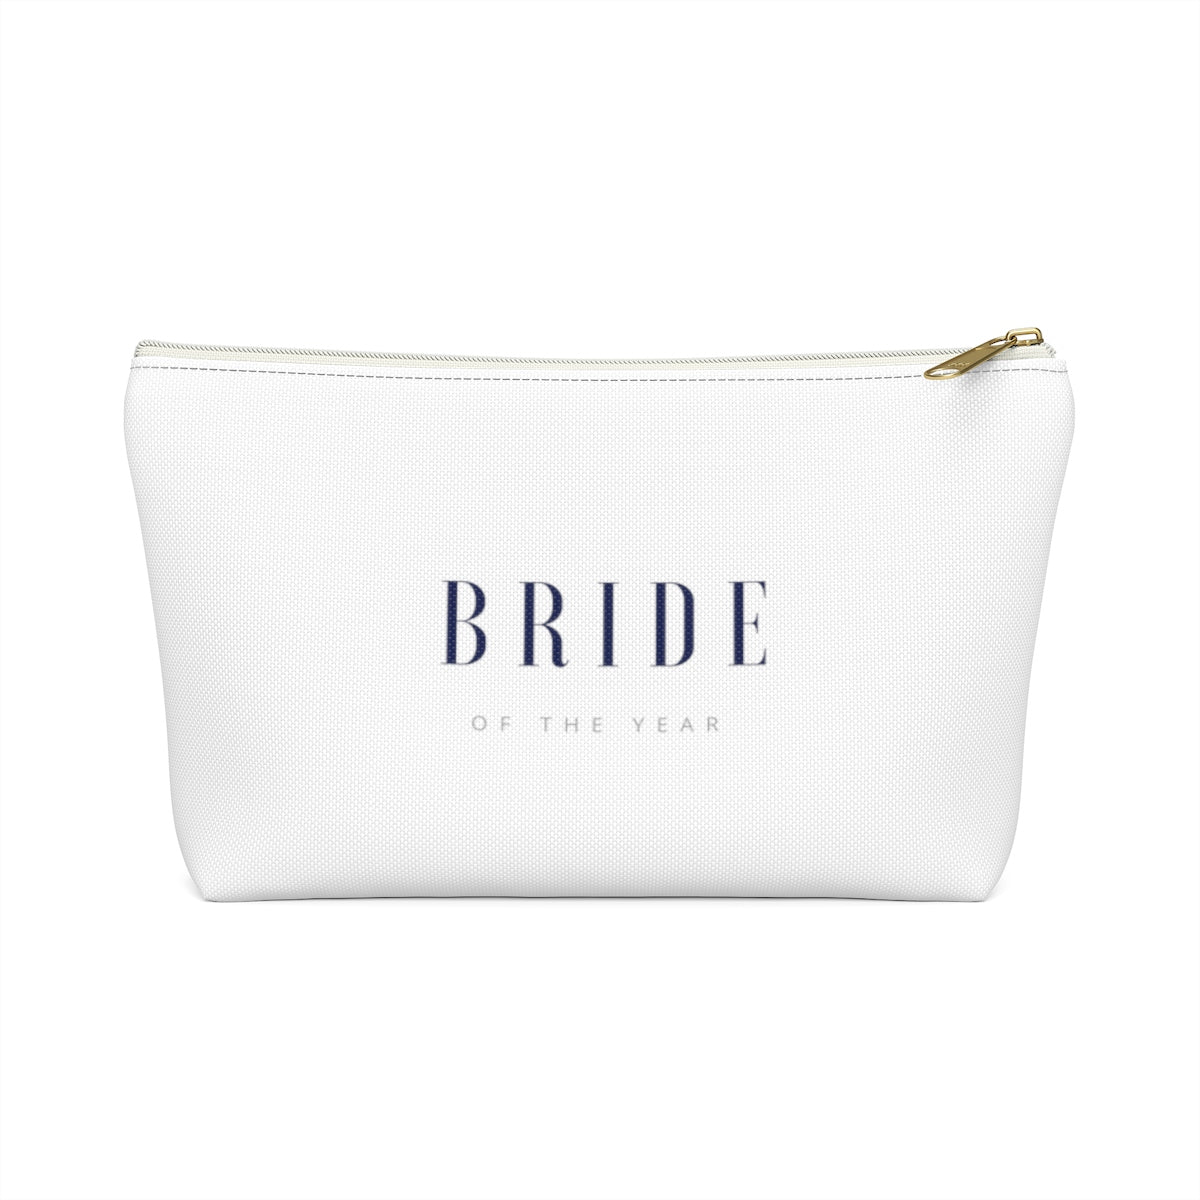 Bride of the Year Cosmetic Travel Bag - Crystal Flower